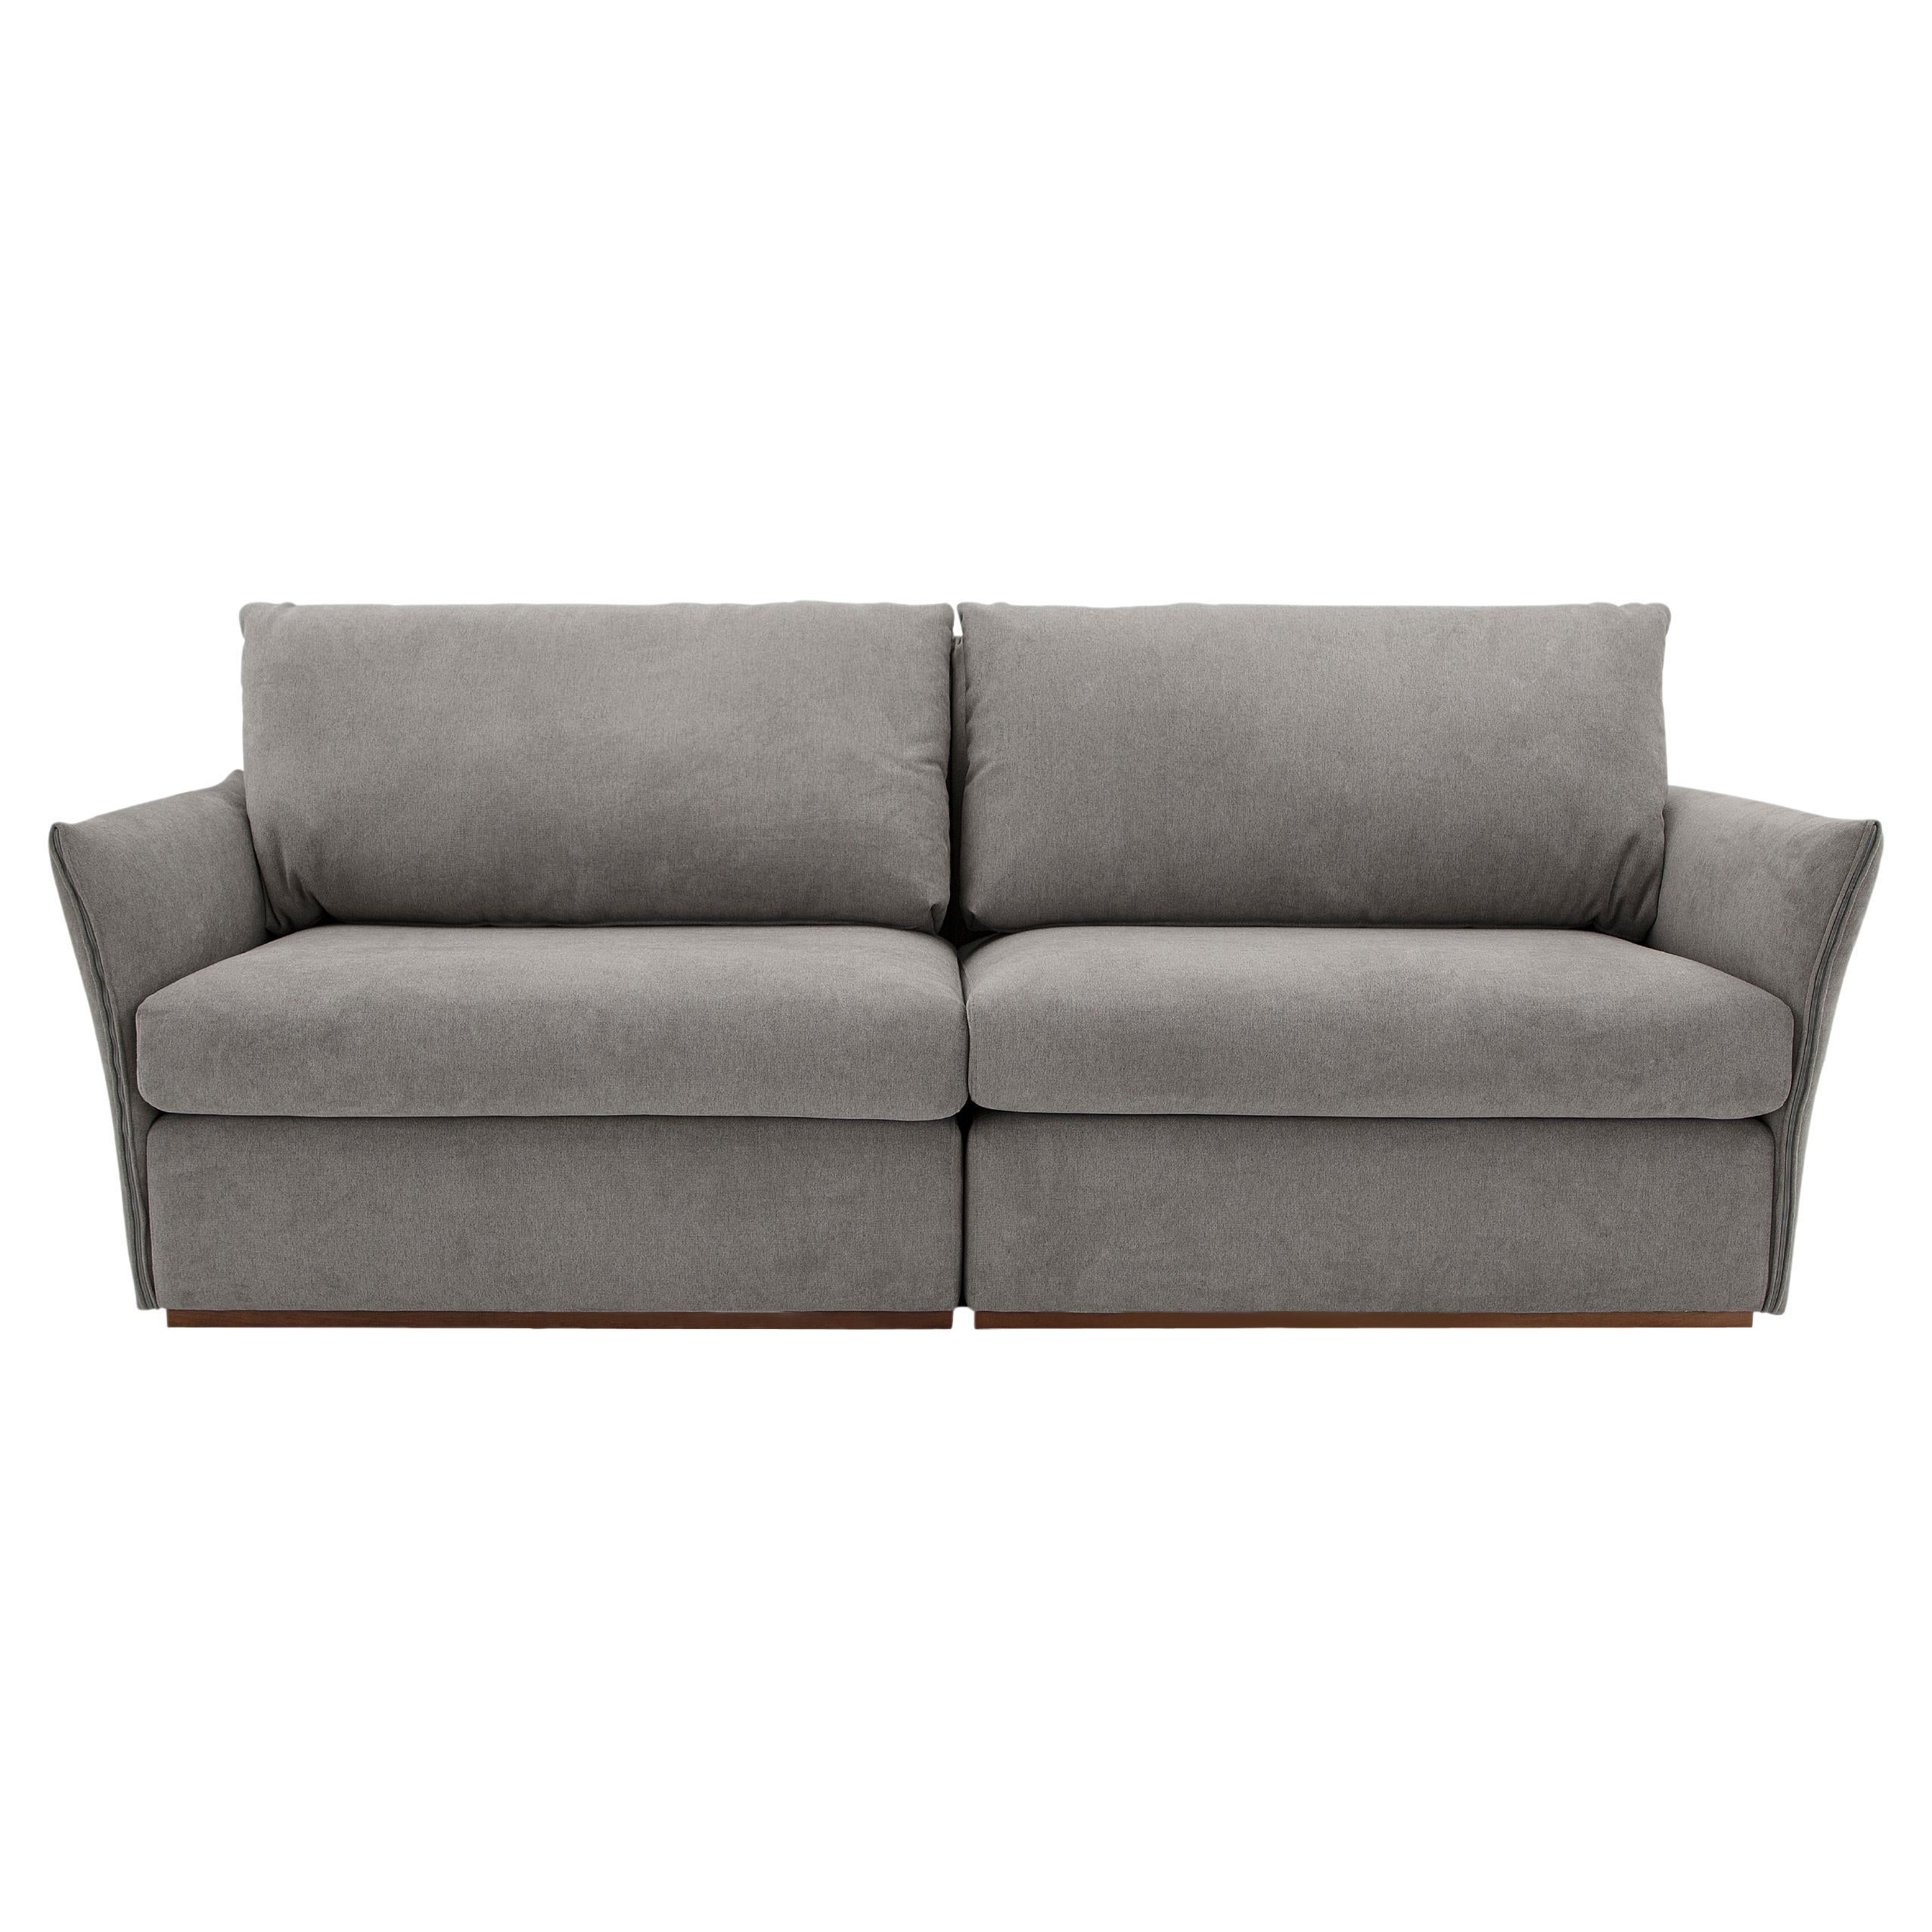 Thin Sofa with Bowed Arms in an Upholstered Gray Fabric